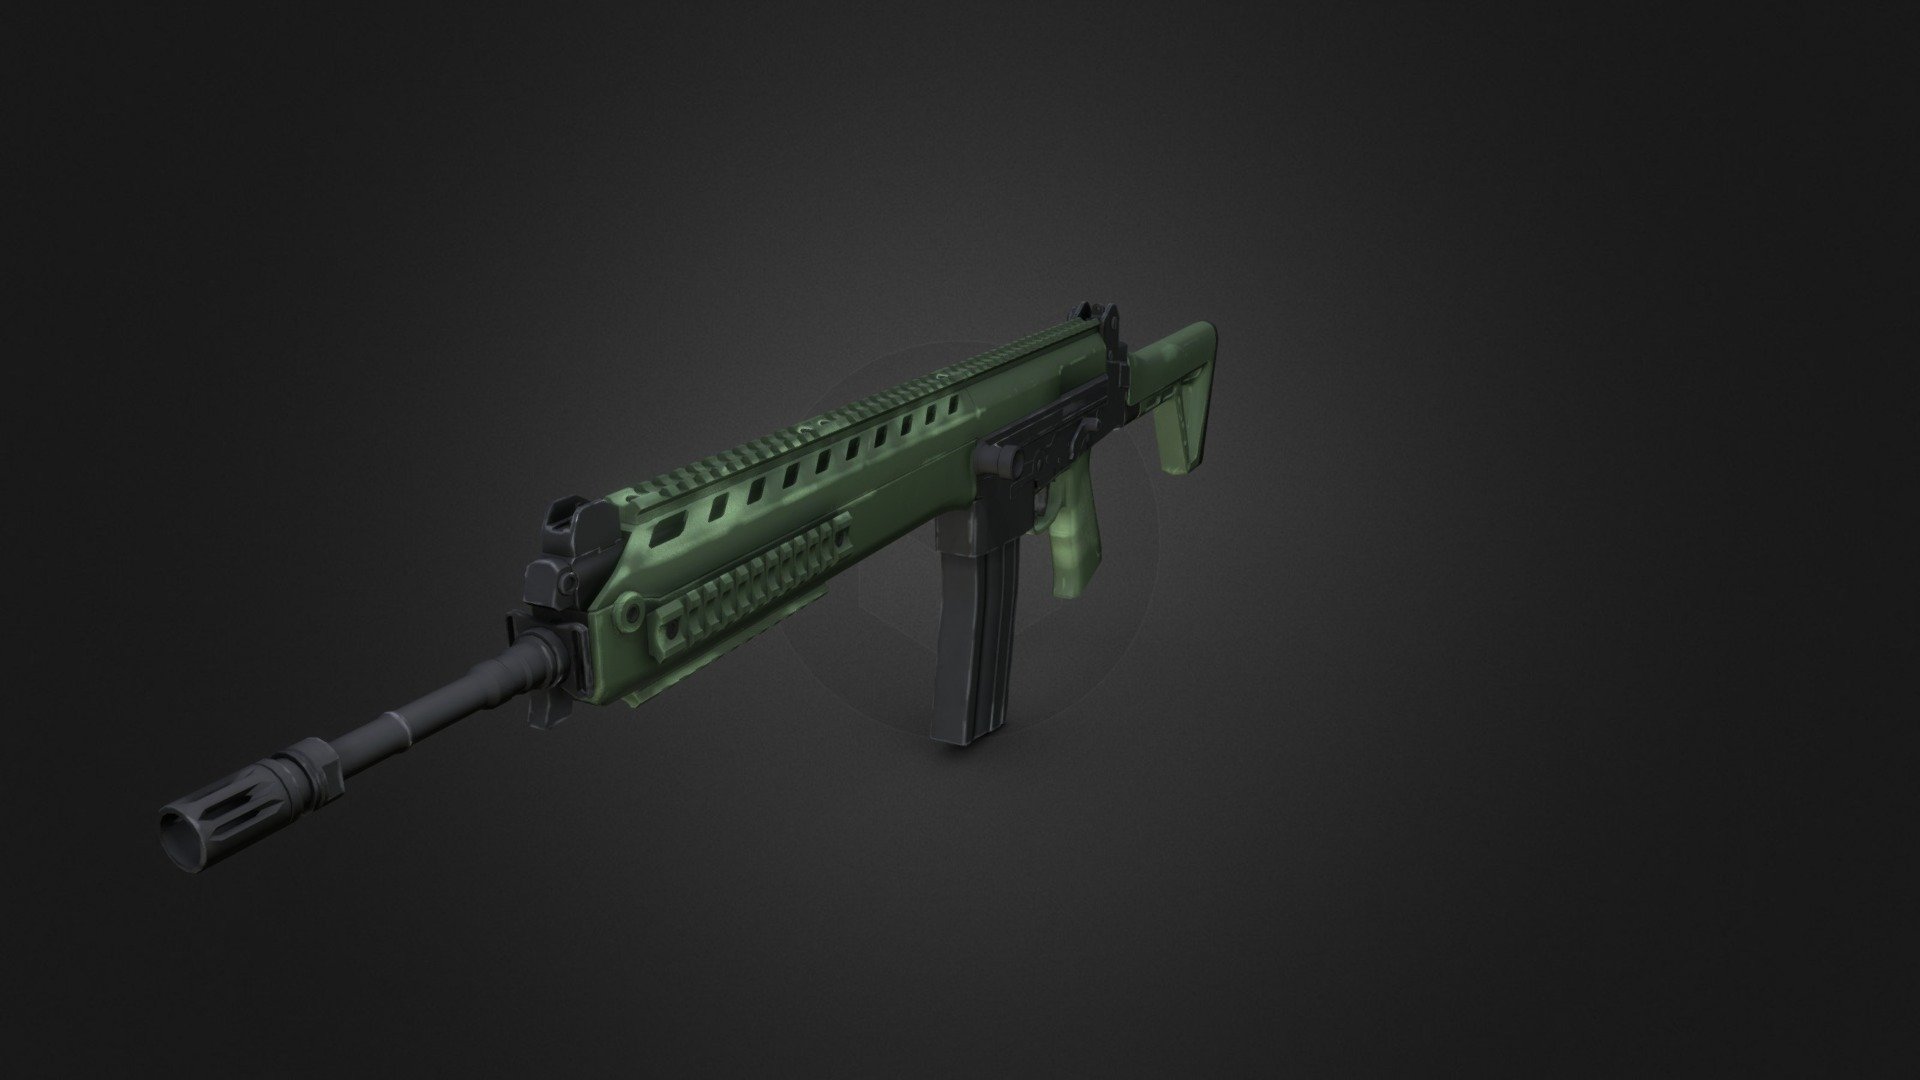 Brazilian rifle, for military use. a mix of FN FAL and a SCAR L.
This is the basic rifle for avarange soldier, there are some variations for special ops and / elite police force.

It has 4 materials with 1024x1024 textures, and enough internal parts so it can have detailed animations 3d model